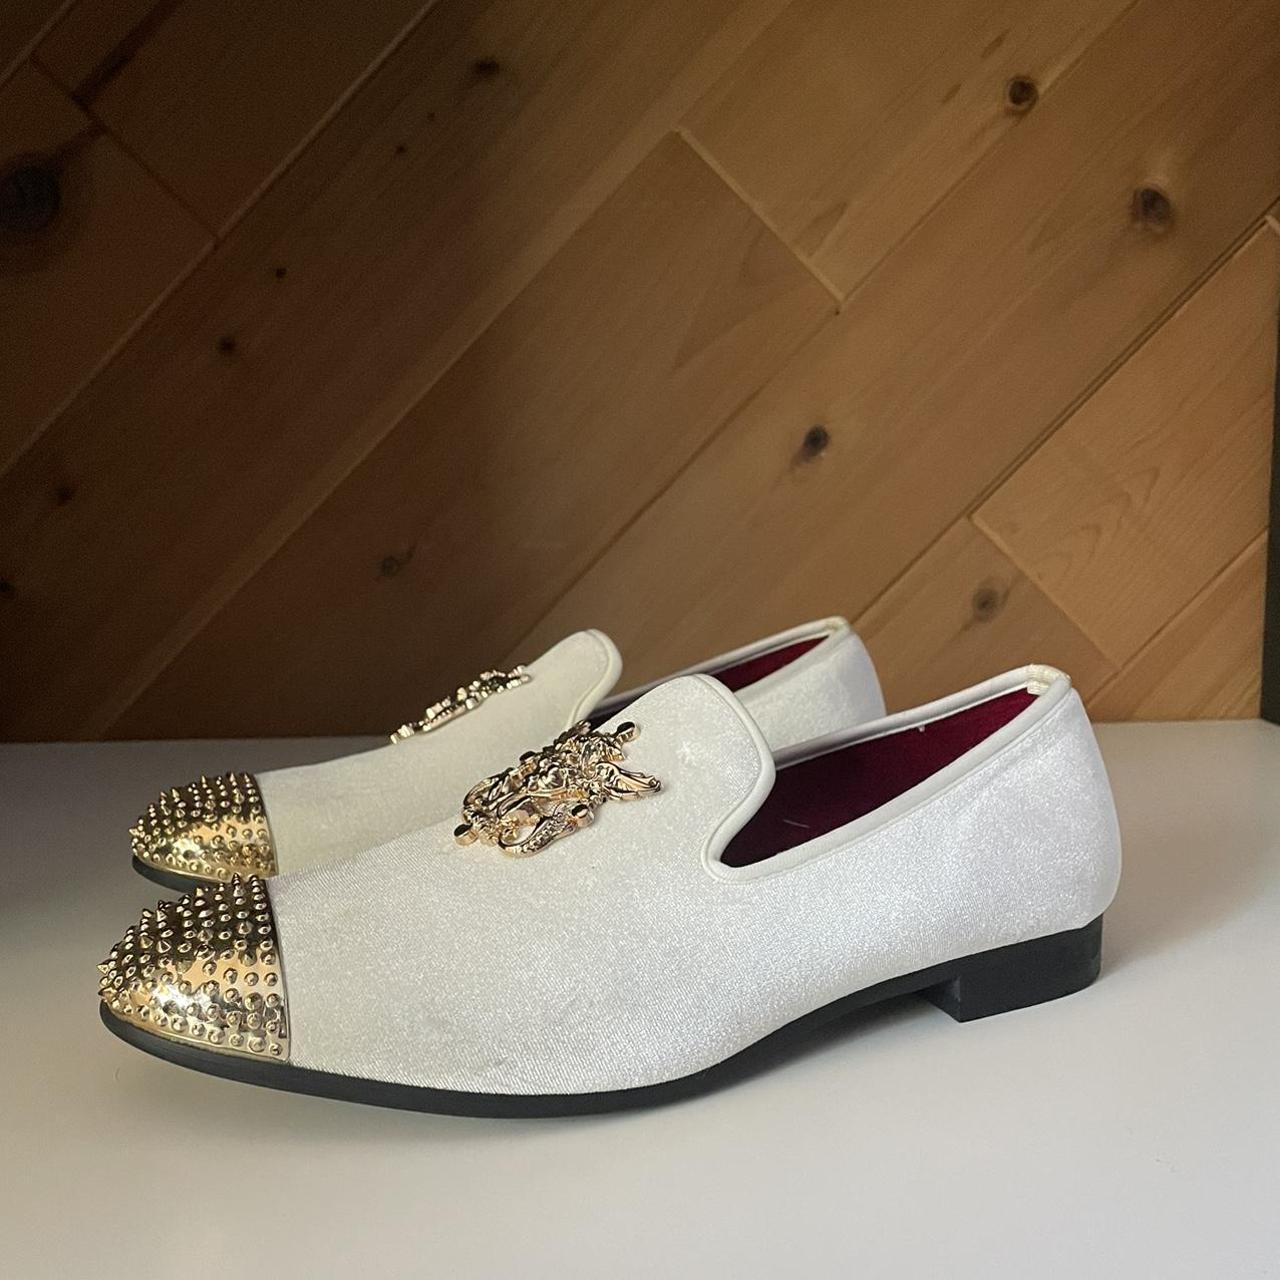 Men's White and Gold Loafers | Depop